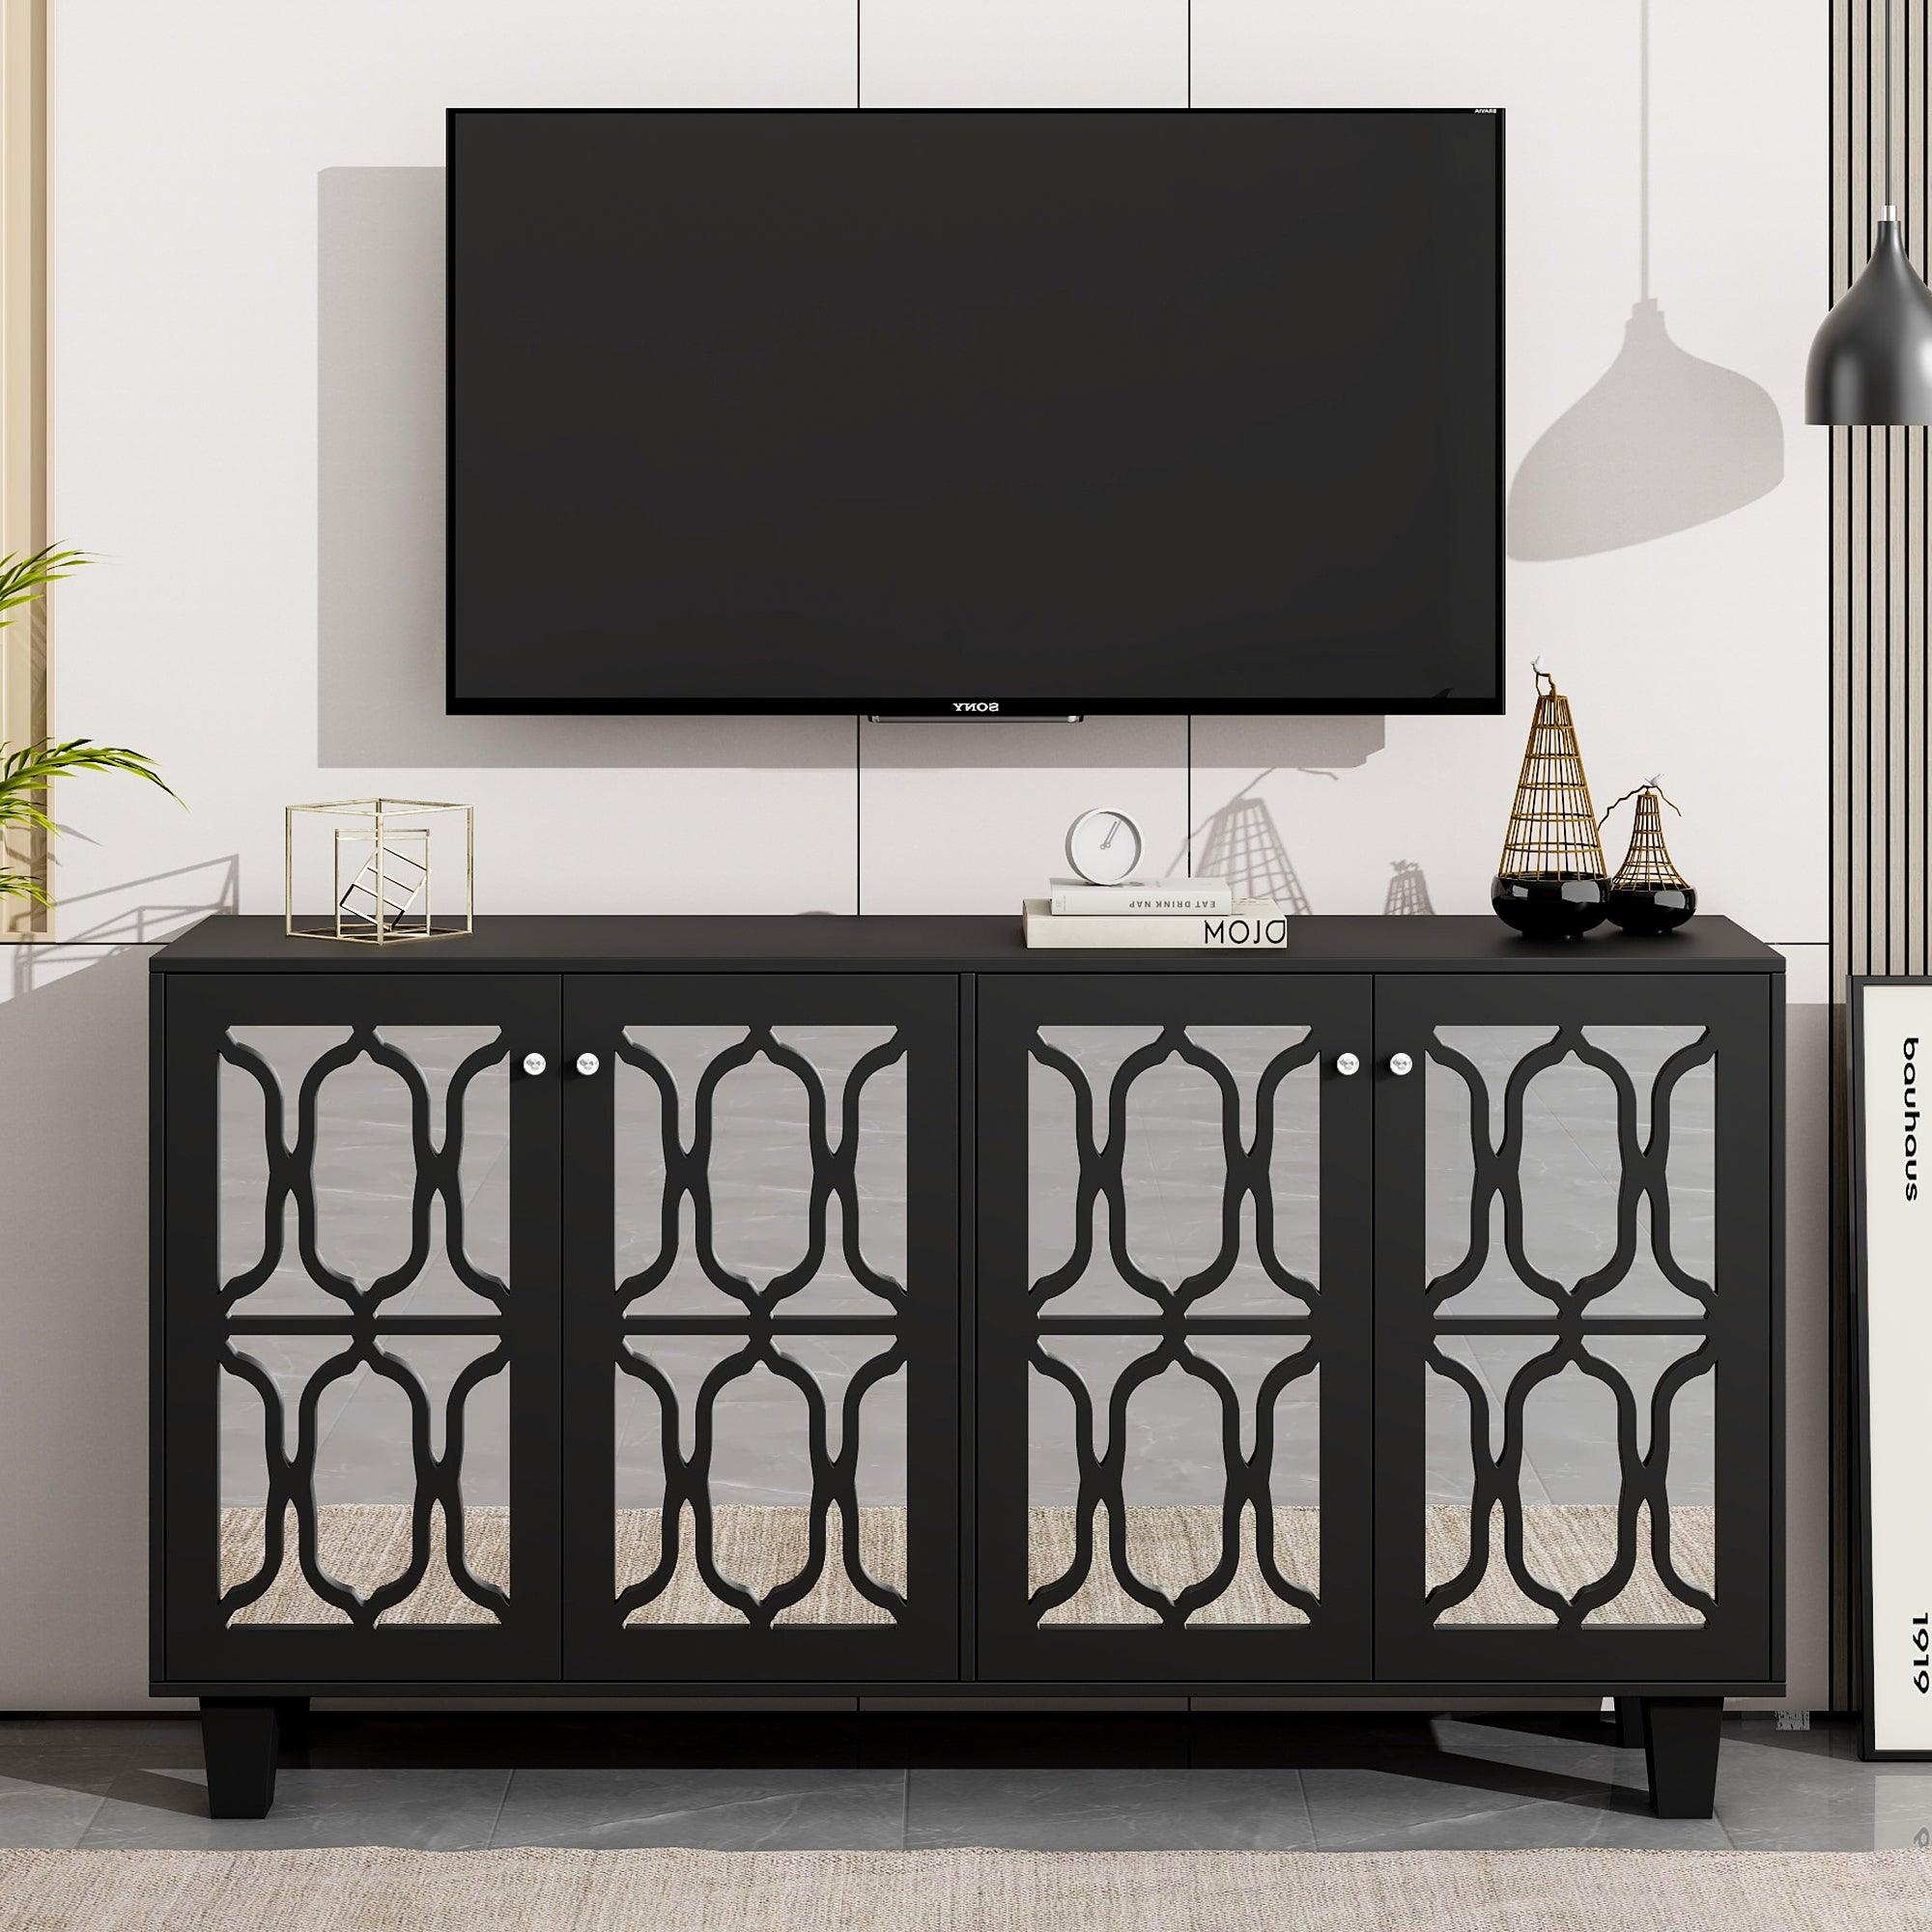 🆓🚛 Buffet Cabinet With Adjustable Shelves, 4-Door Mirror Hollow-Carved Tv Stand for Tvs Up To 65'', Multi-Functional Console Table With Storage Credenza Accent Cabinet for Living Room, Black